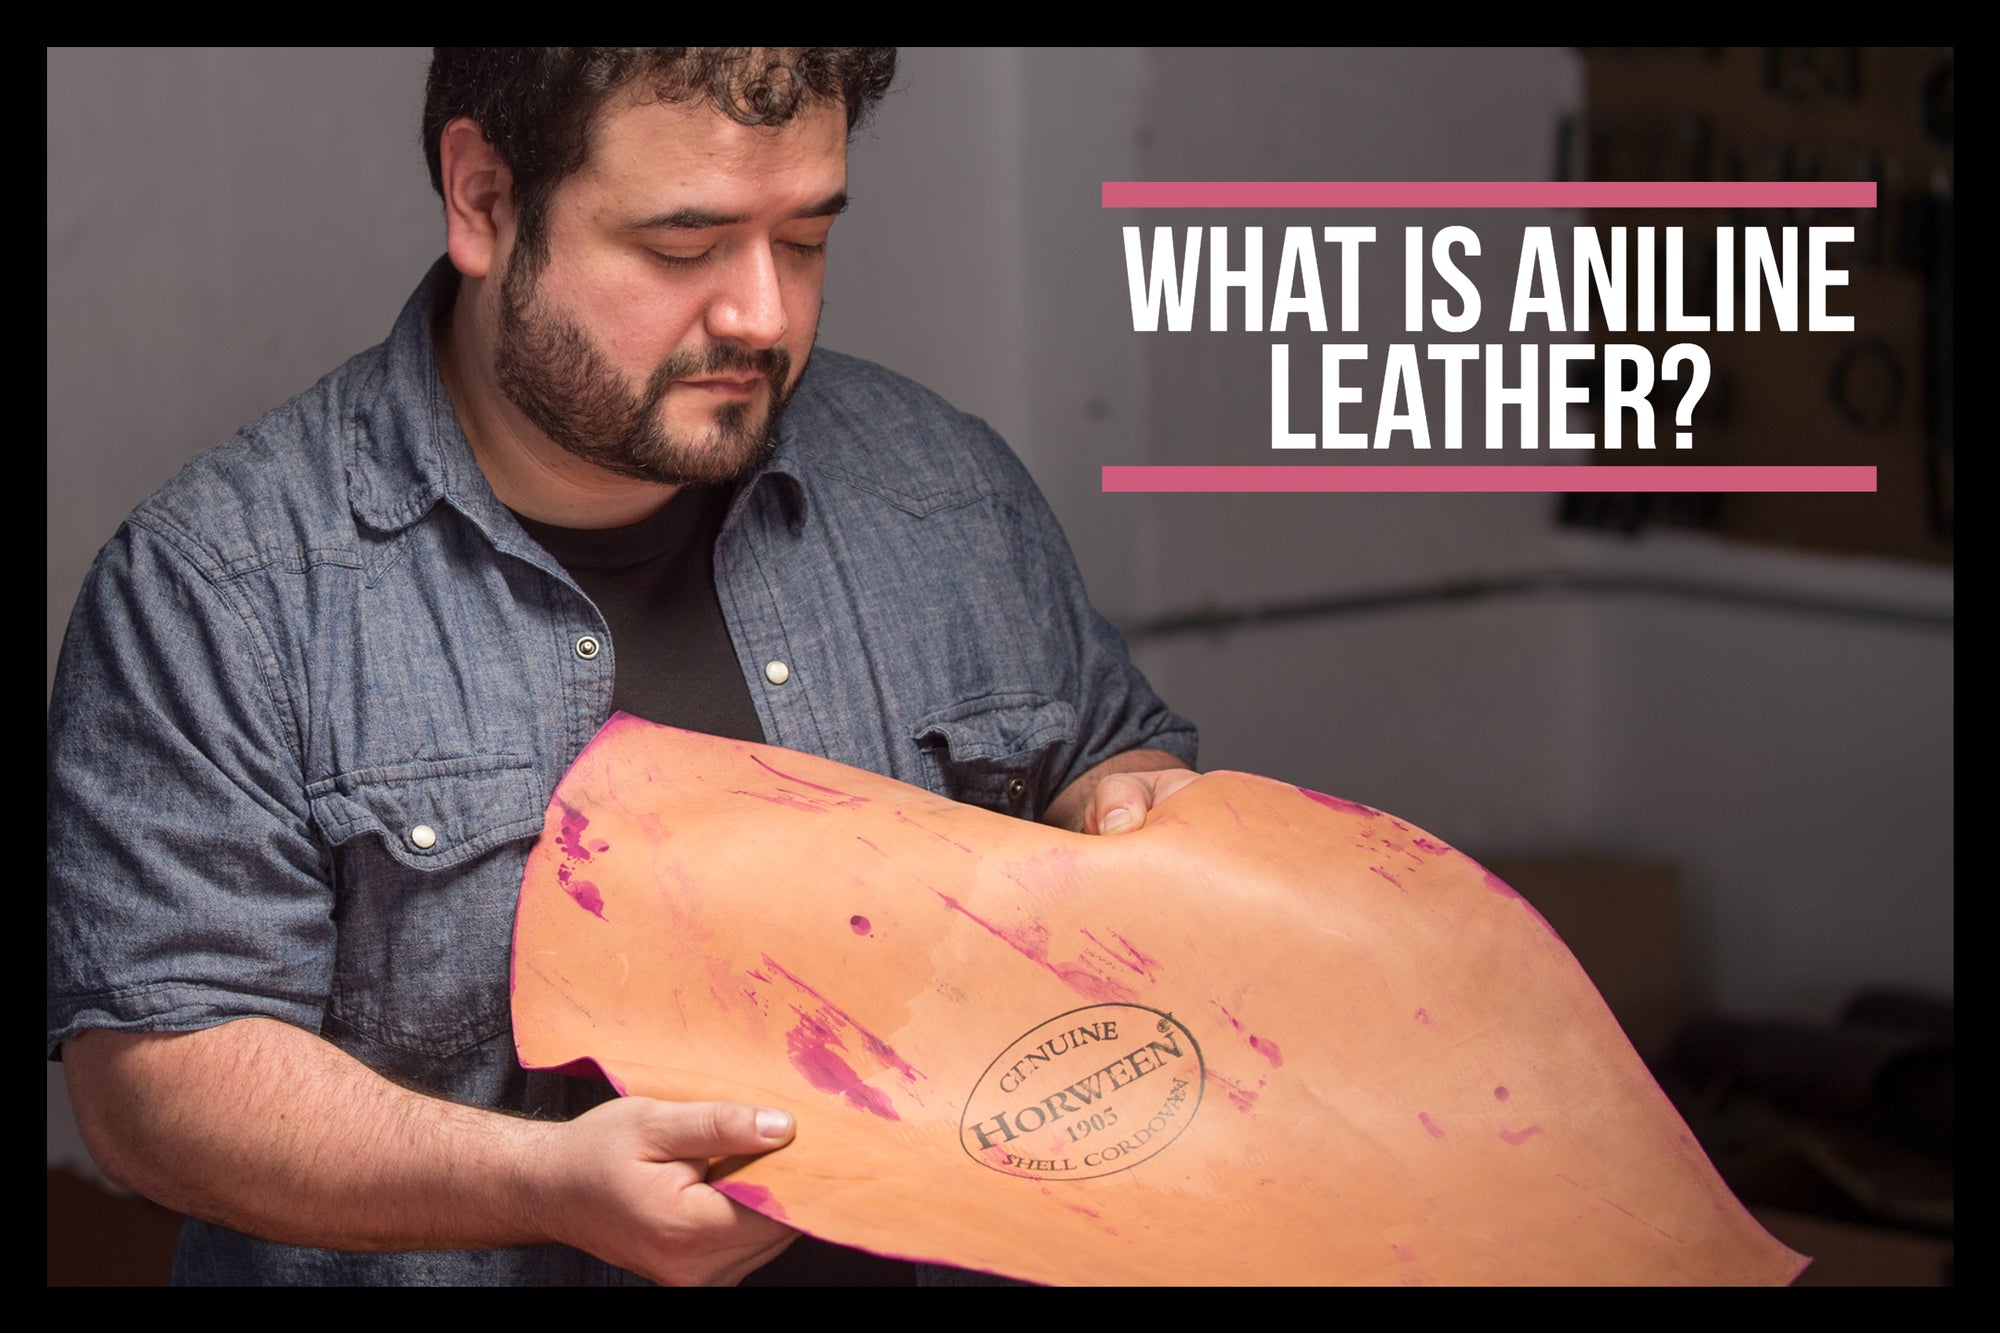 What is aniline leather?